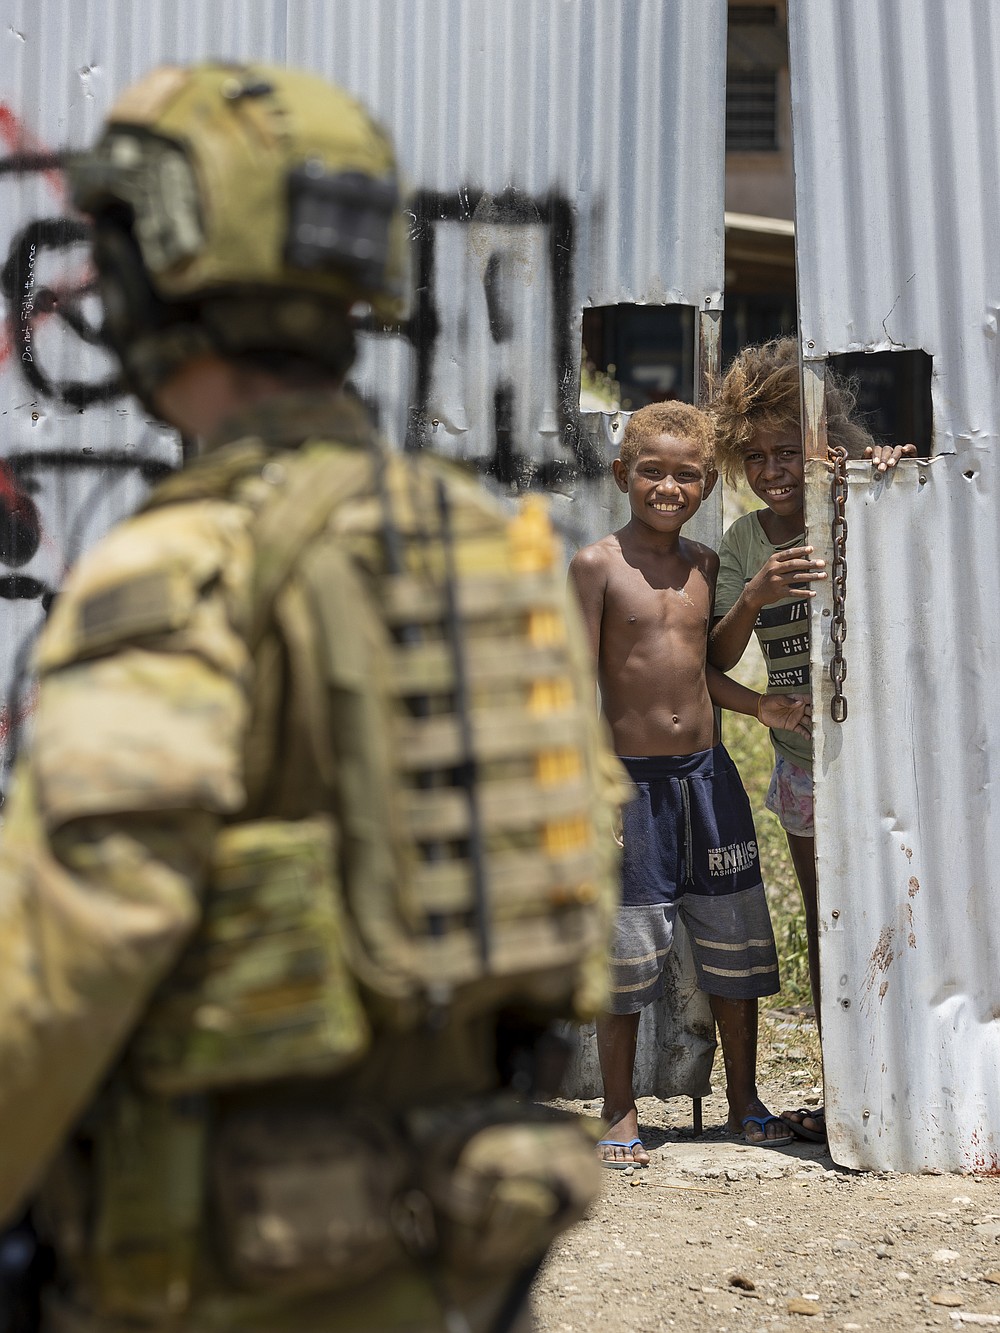 In this photo provided by the Department of Defence, Australian Army Corporal Aaron Woodham is watched by young boys during a community engagement patrol through Honiara, Solomon Islands, Saturday, Nov. 27, 2021. Solomon Islands police have found multiple bodies in a burned-out building and arrested more than 100 people in this week&#x27;s violence sparked by concerns about the Pacific nation&#x27;s increasing links with China. (Cpl. Brandon Grey/Department of Defence via AP)